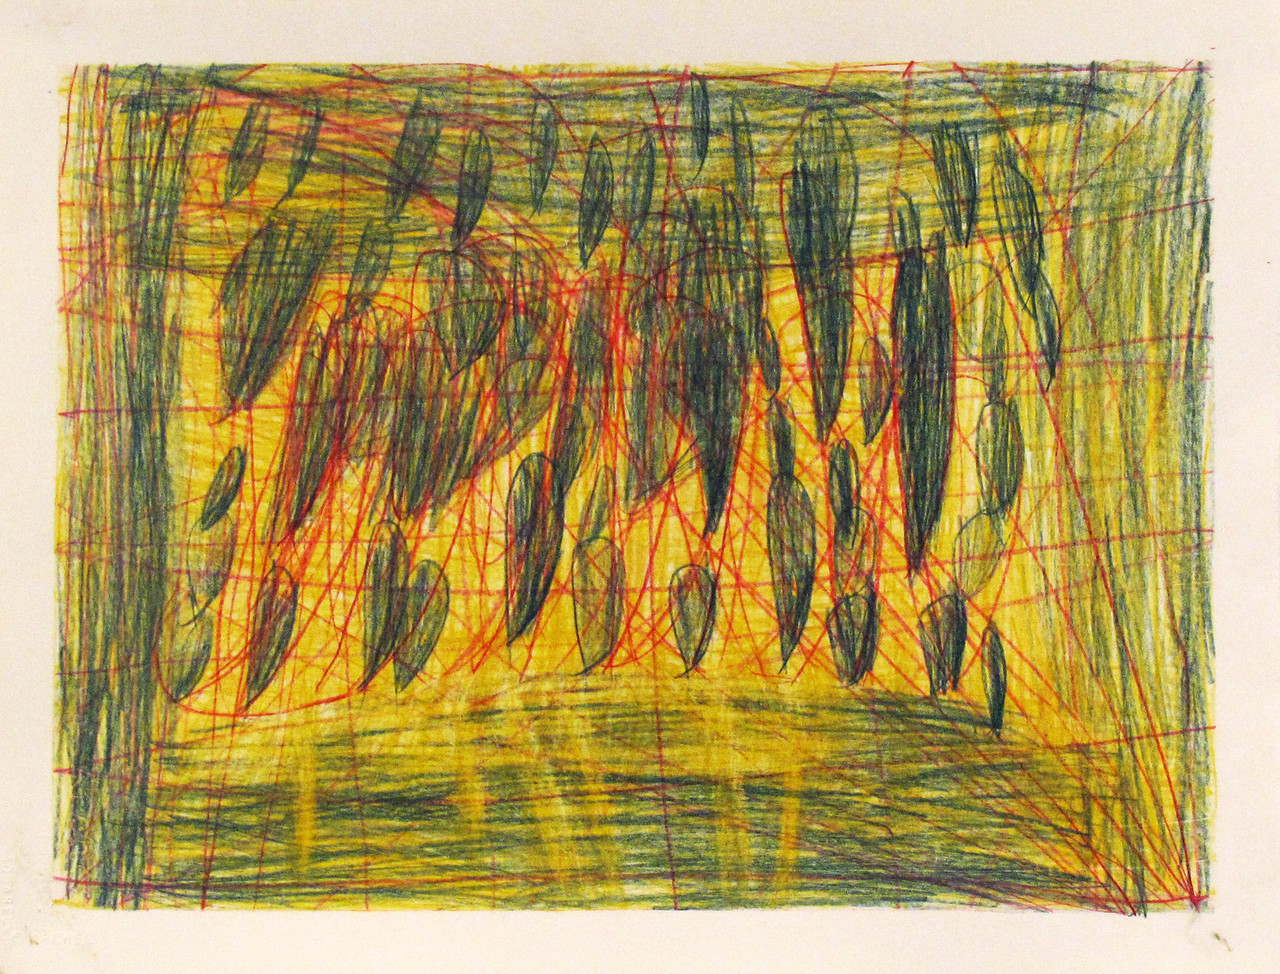 Untitled, 1988, Colored pencil and graphite on paper, 38.7 x 47 cm, BS 019